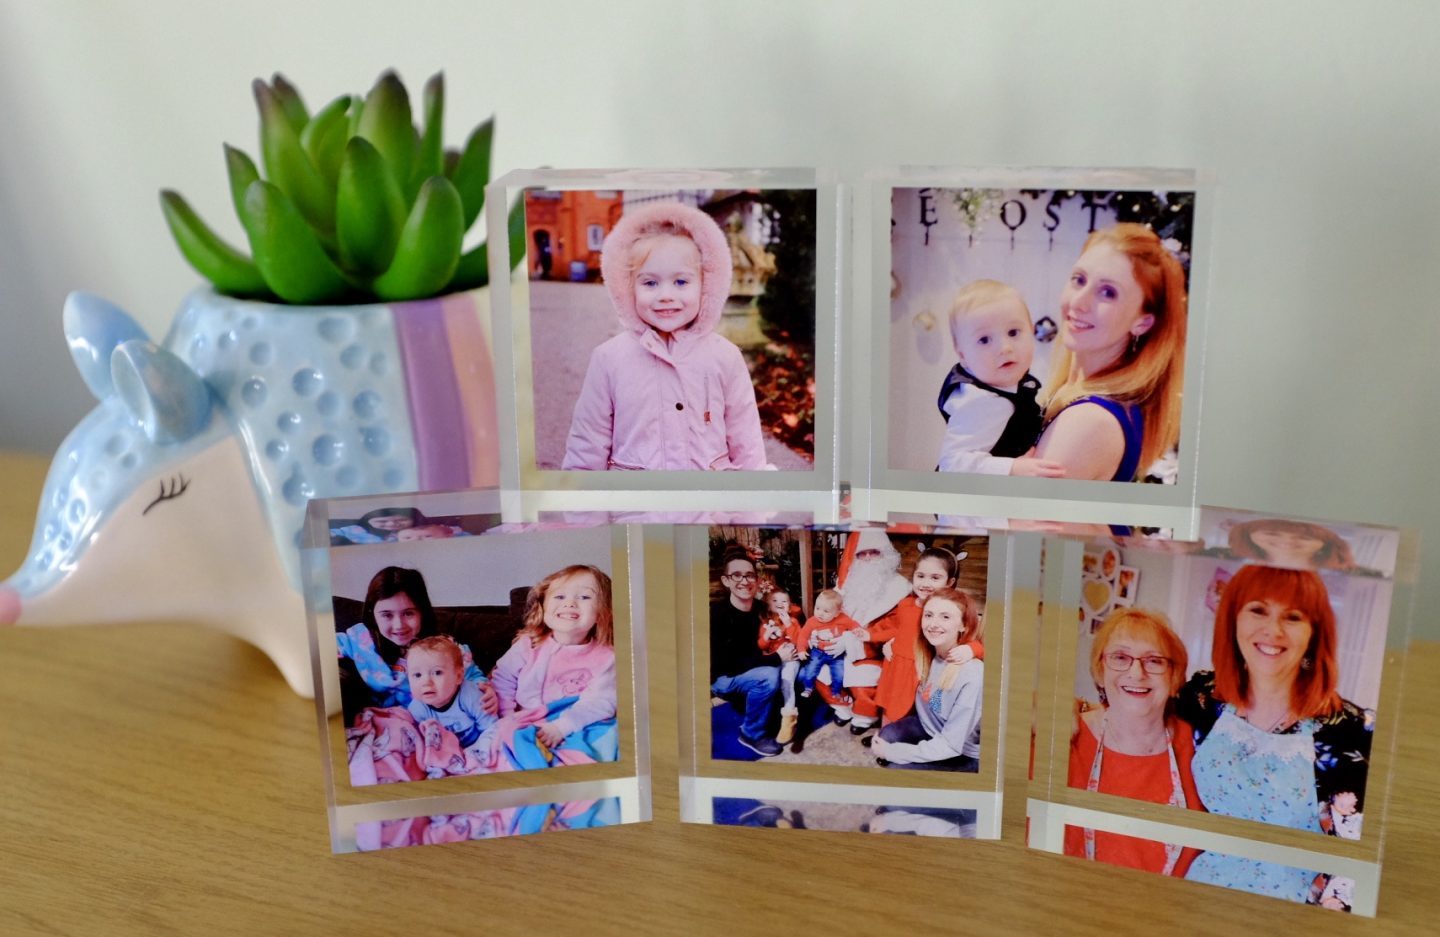 My-Picture.co.uk – Valentine’s Gifts for the Family – REVIEW